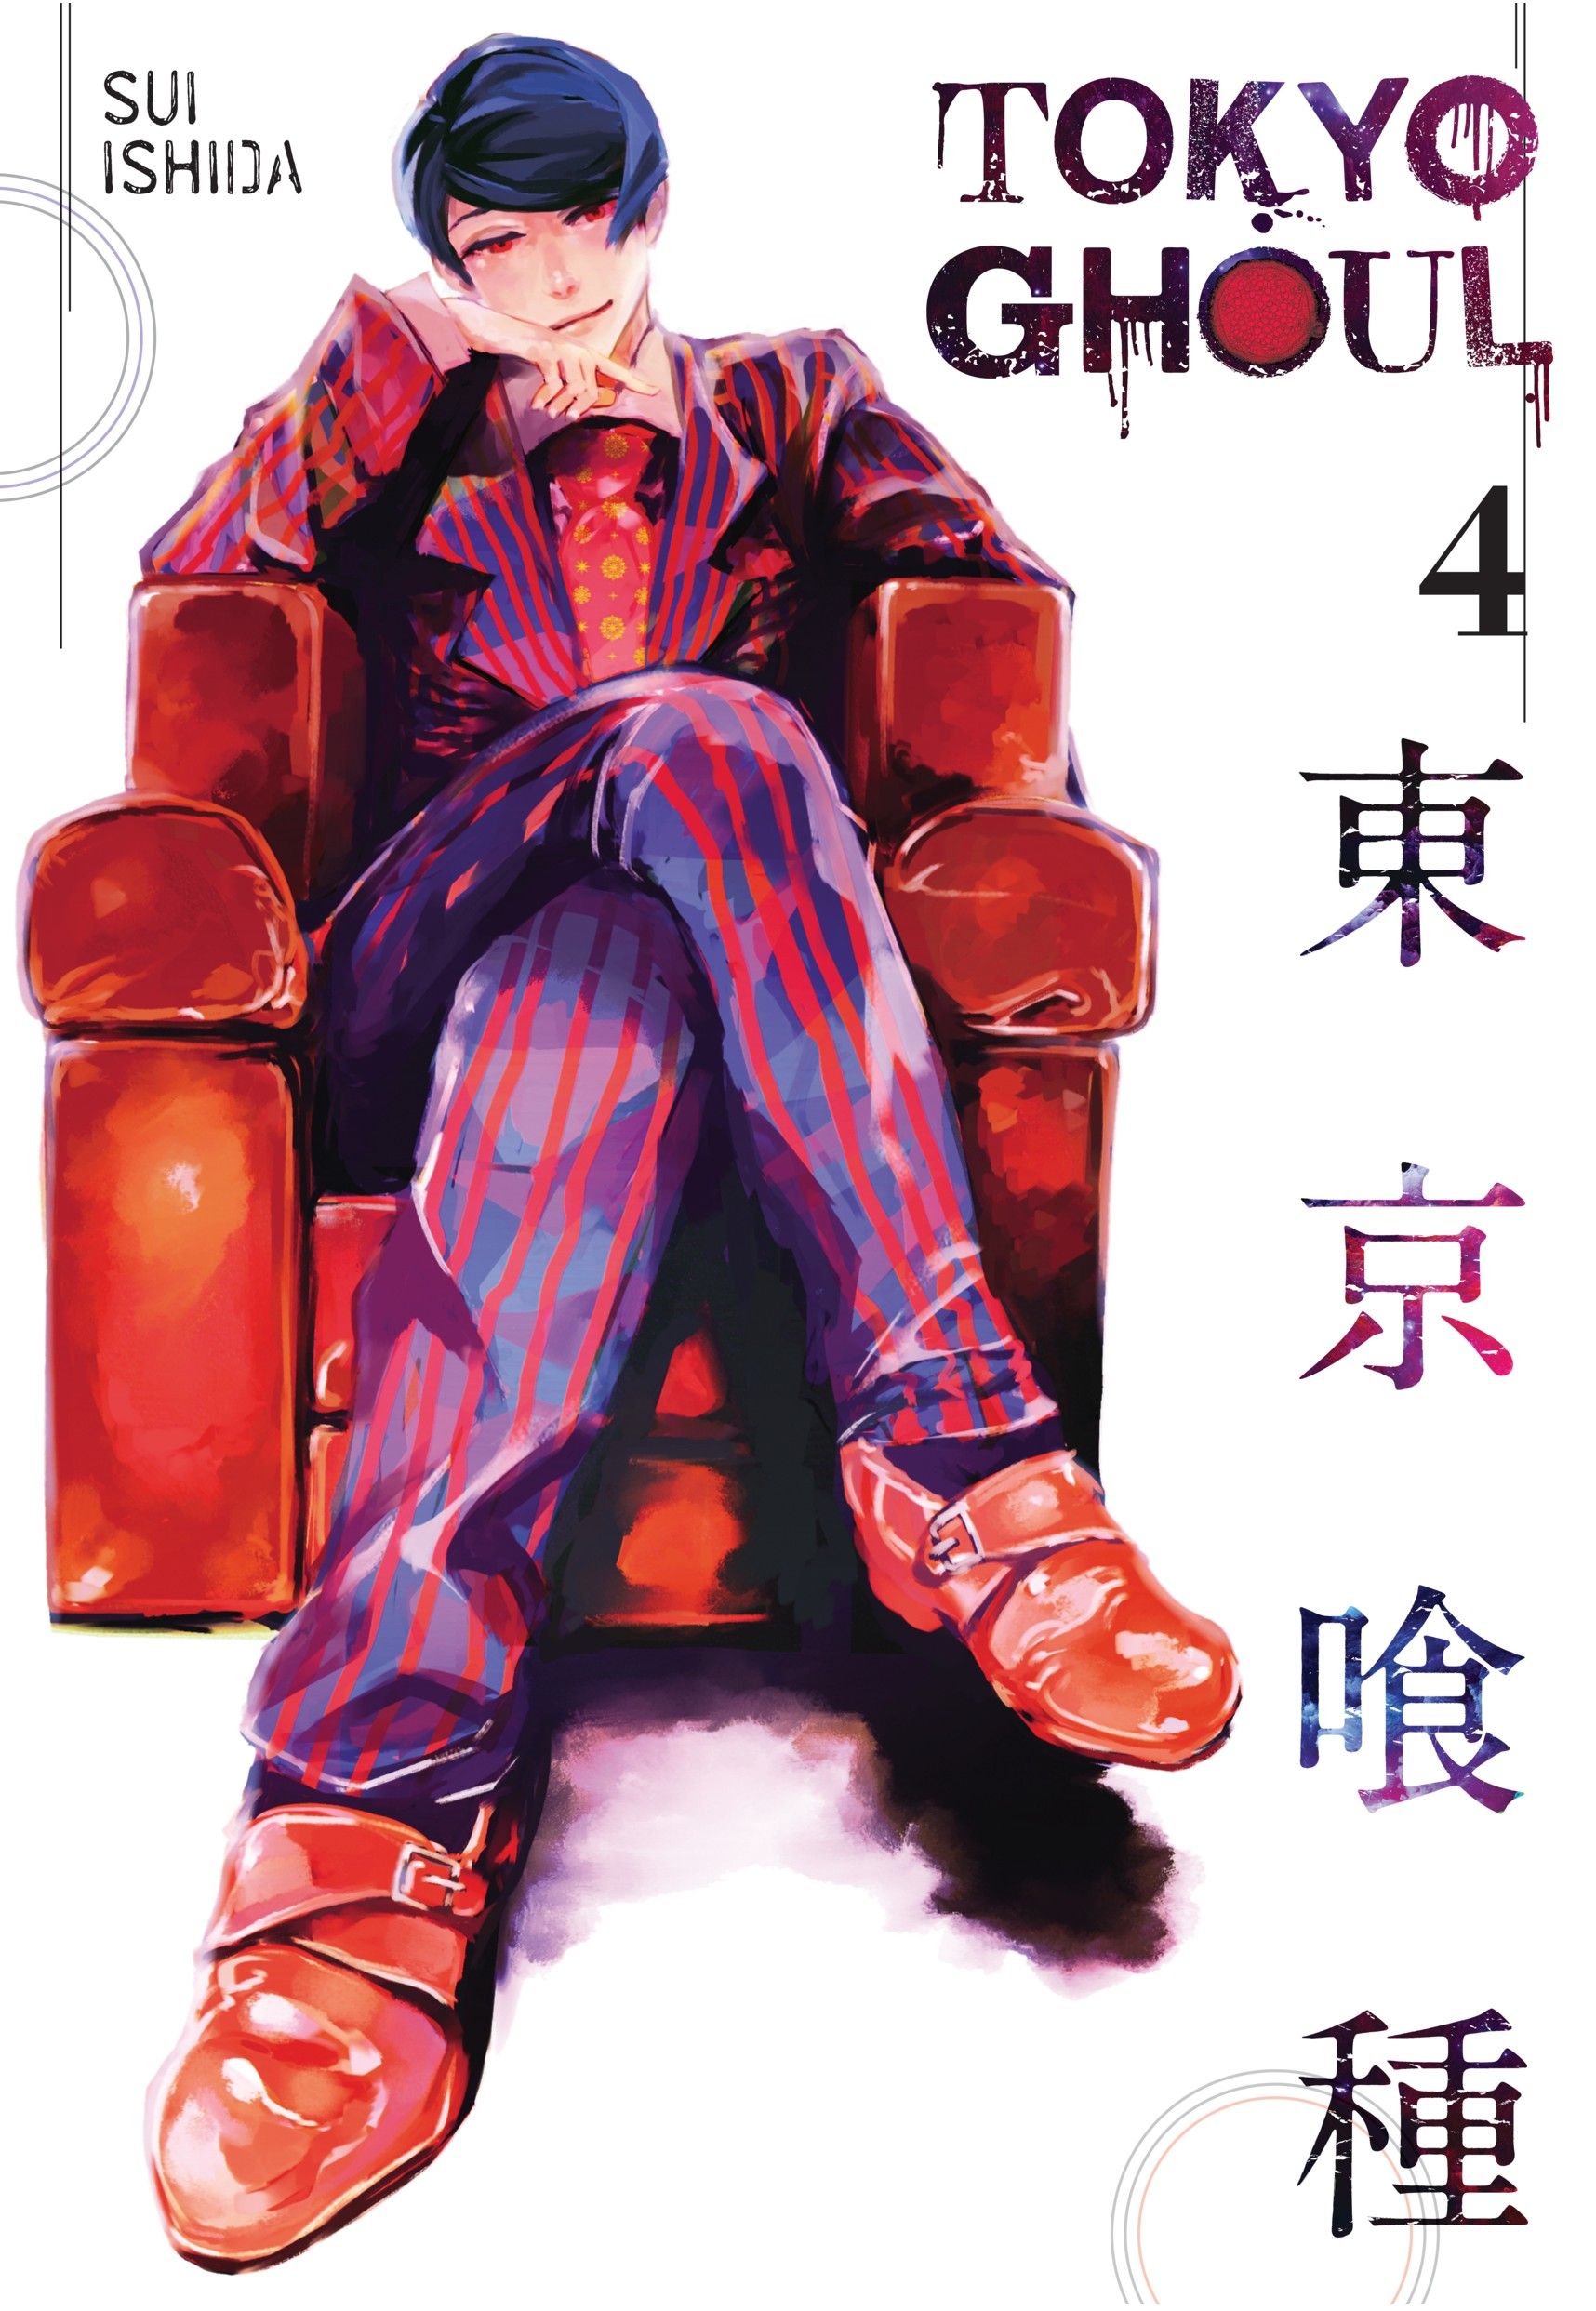 Tokyo Ghoul volume 5 featuring Tsukishima sitting on a couch with his leg crossed